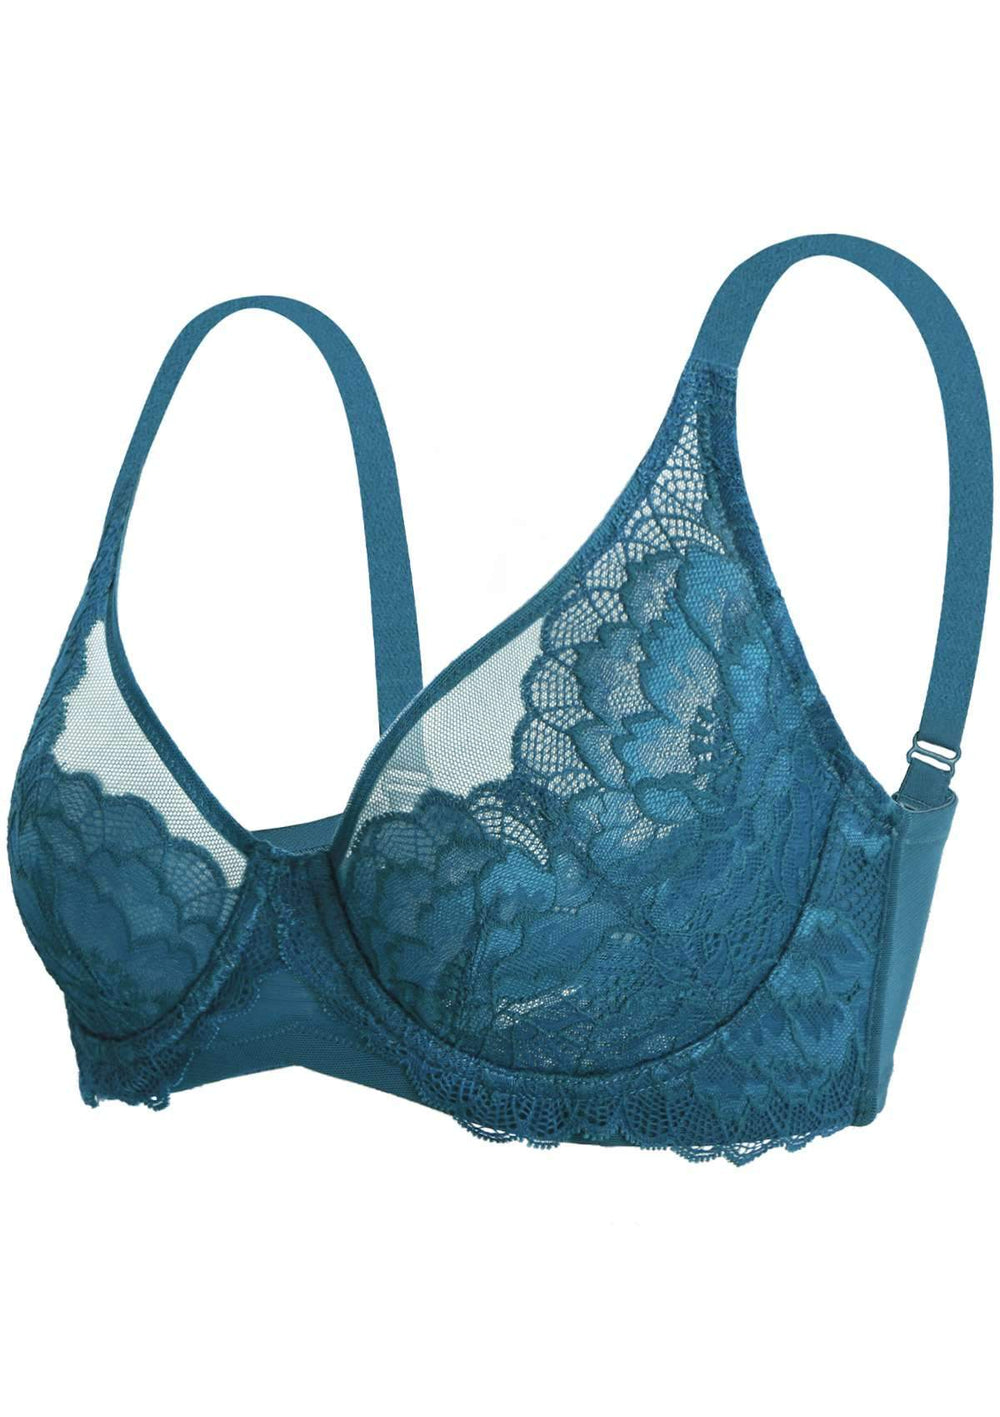 Teal Lace Underwired Bra